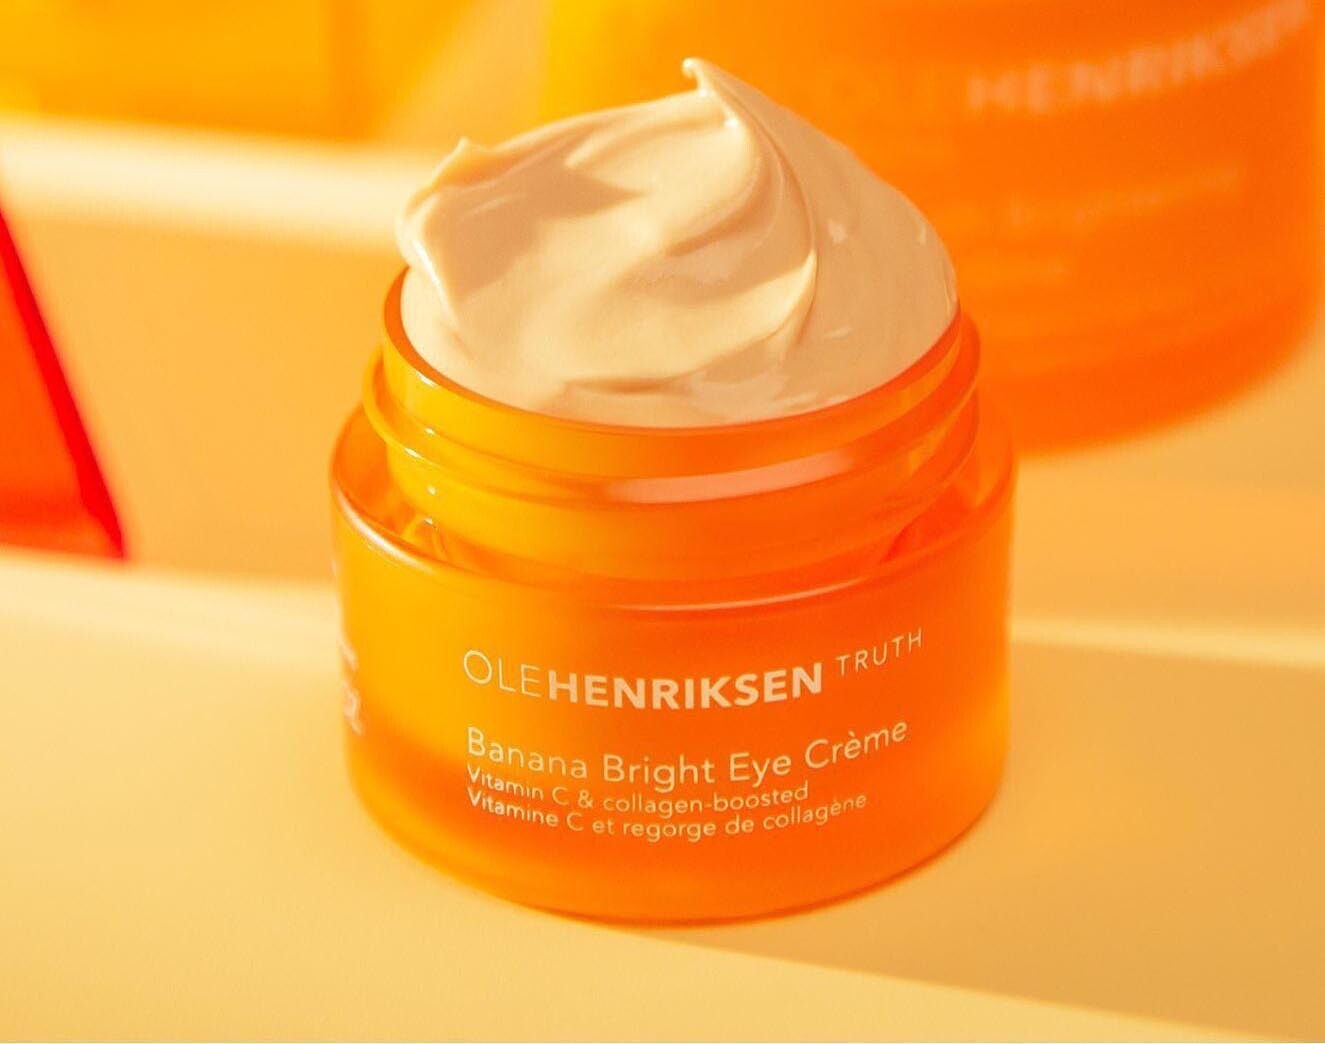 Ole Henriksen On Vitamin C, His Skincare Philosophy And Staying Youthful